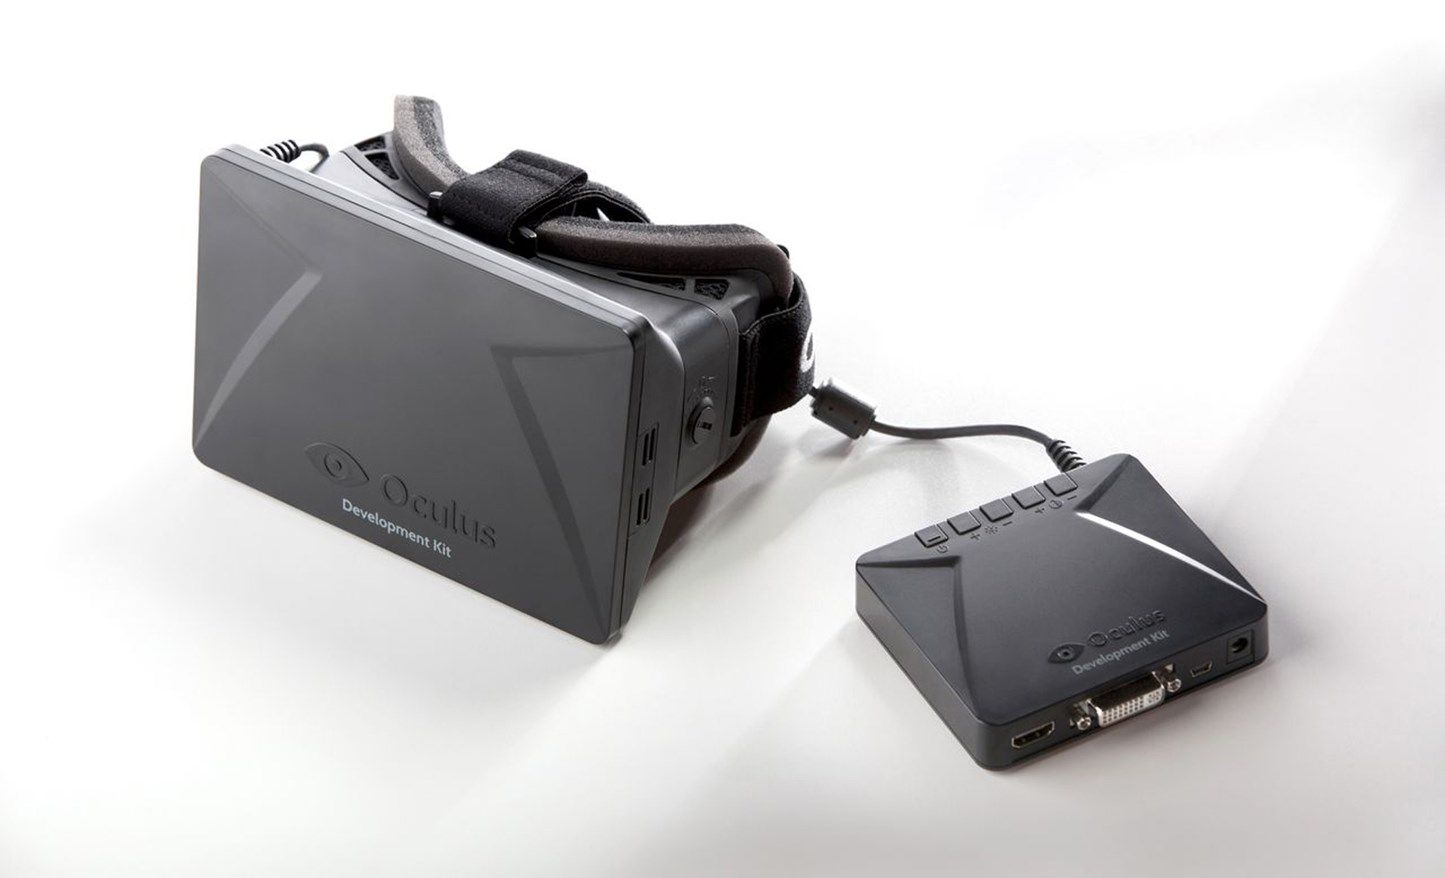 Forkert Ny ankomst give An Evening With the Oculus Rift DK1 · Vegard Skjefstad